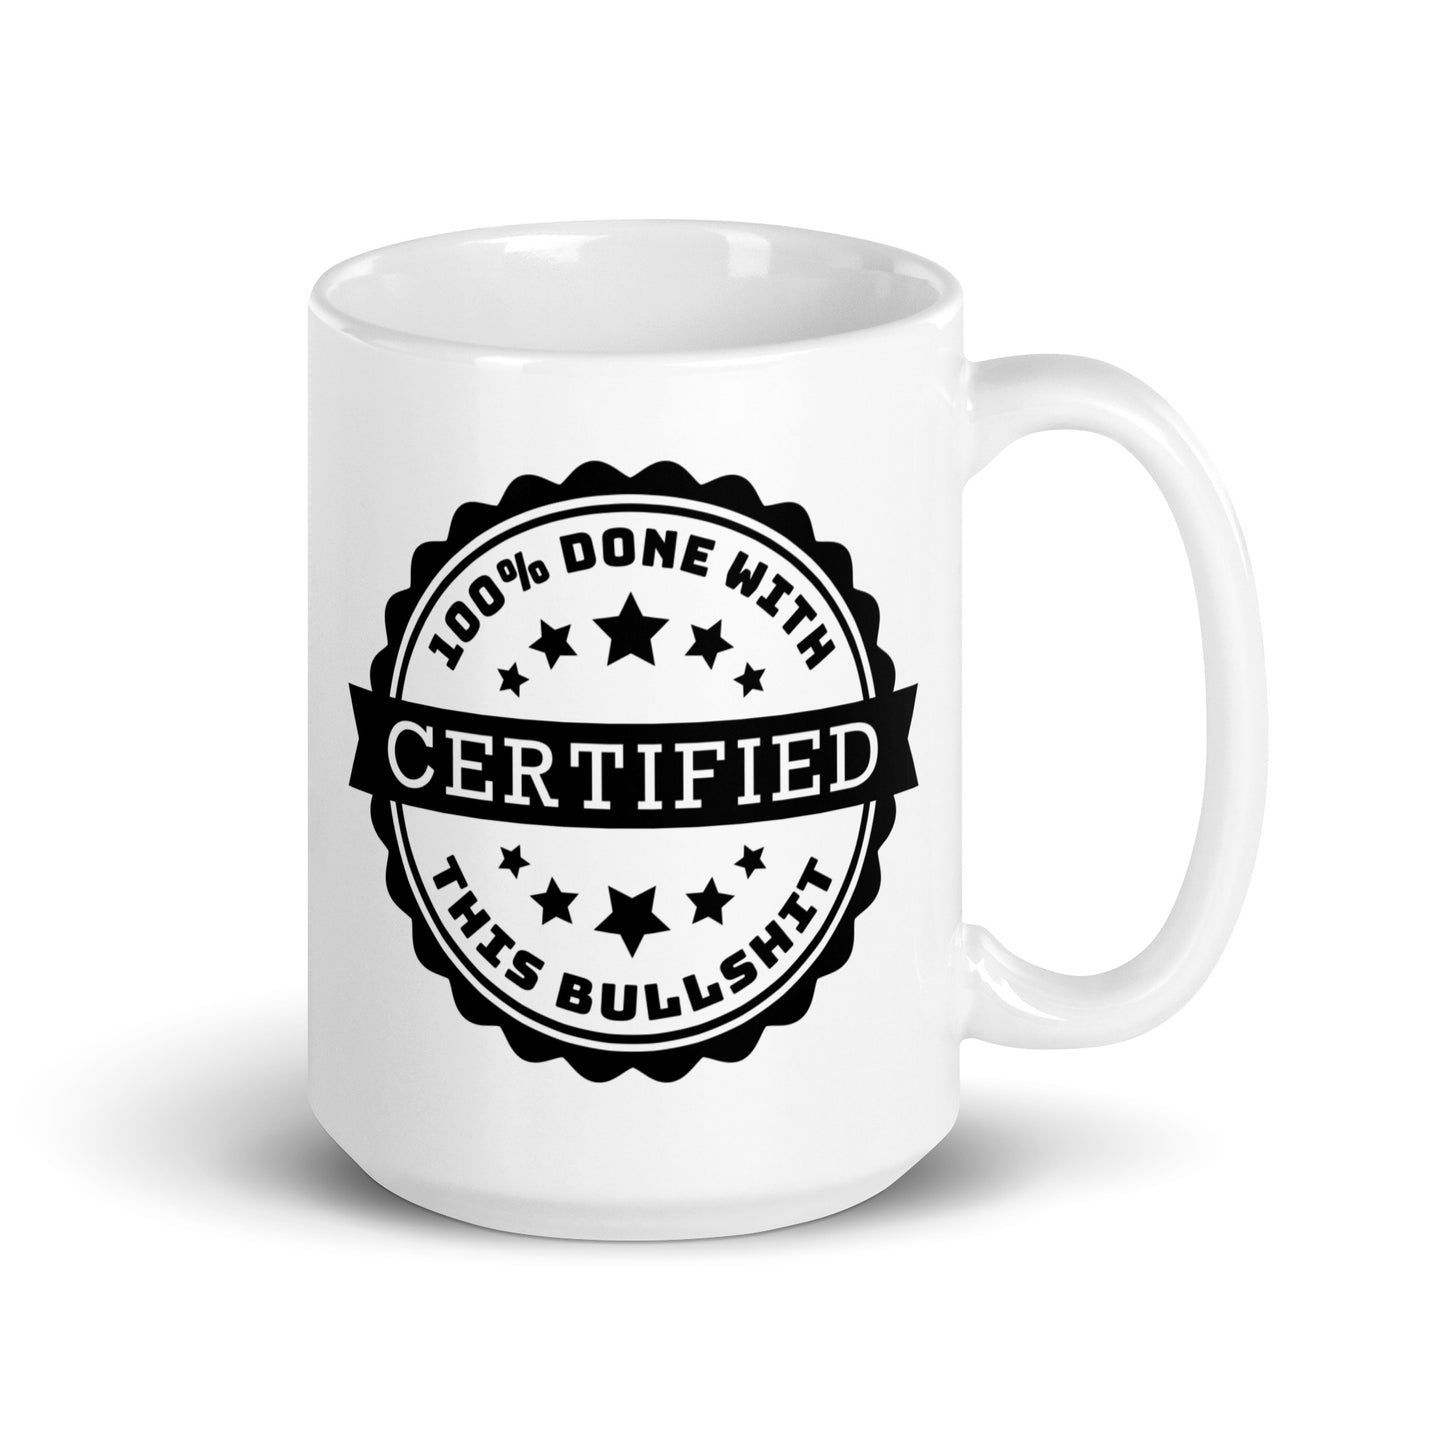 A white 15 oz ceramic coffee mug featuring an official-looking stamp that reads "Certified 100% Done with this bullshit"